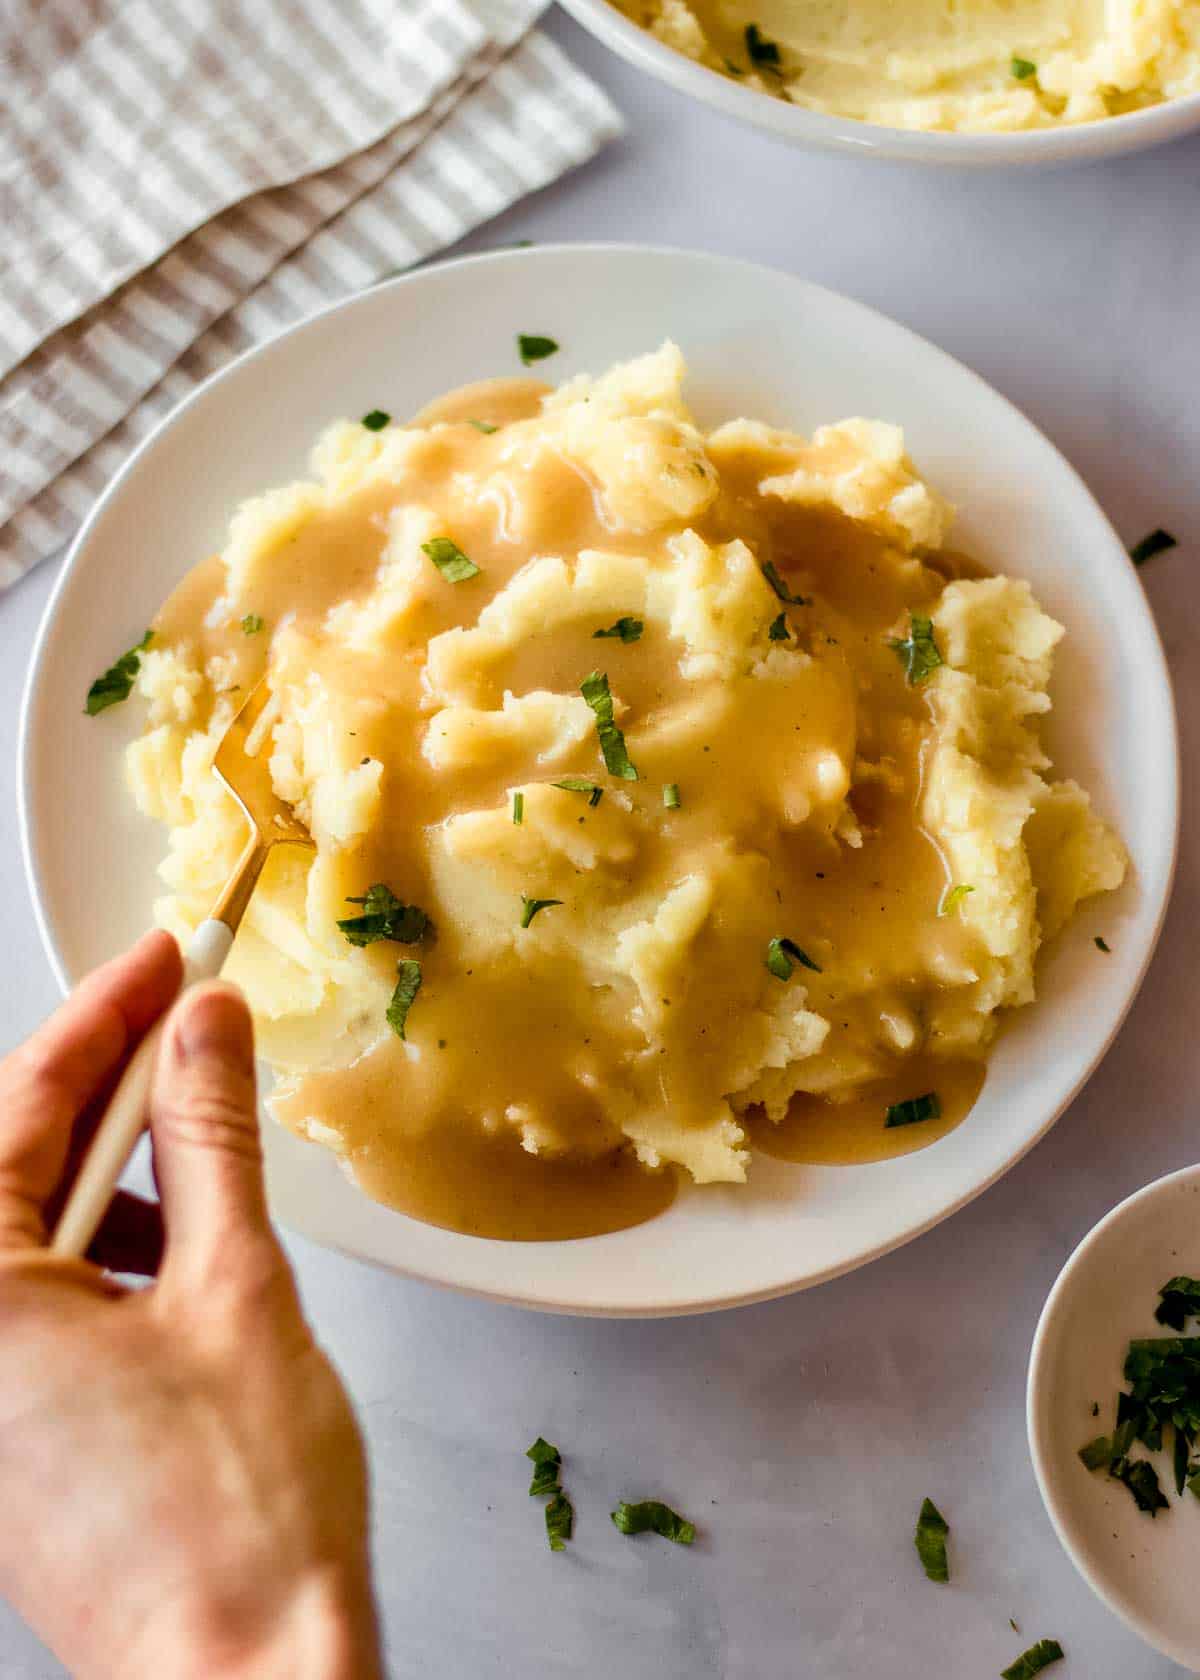 A woman's hand takes a forkful of mashed potatoes with easy vegan gravy from a white plate.